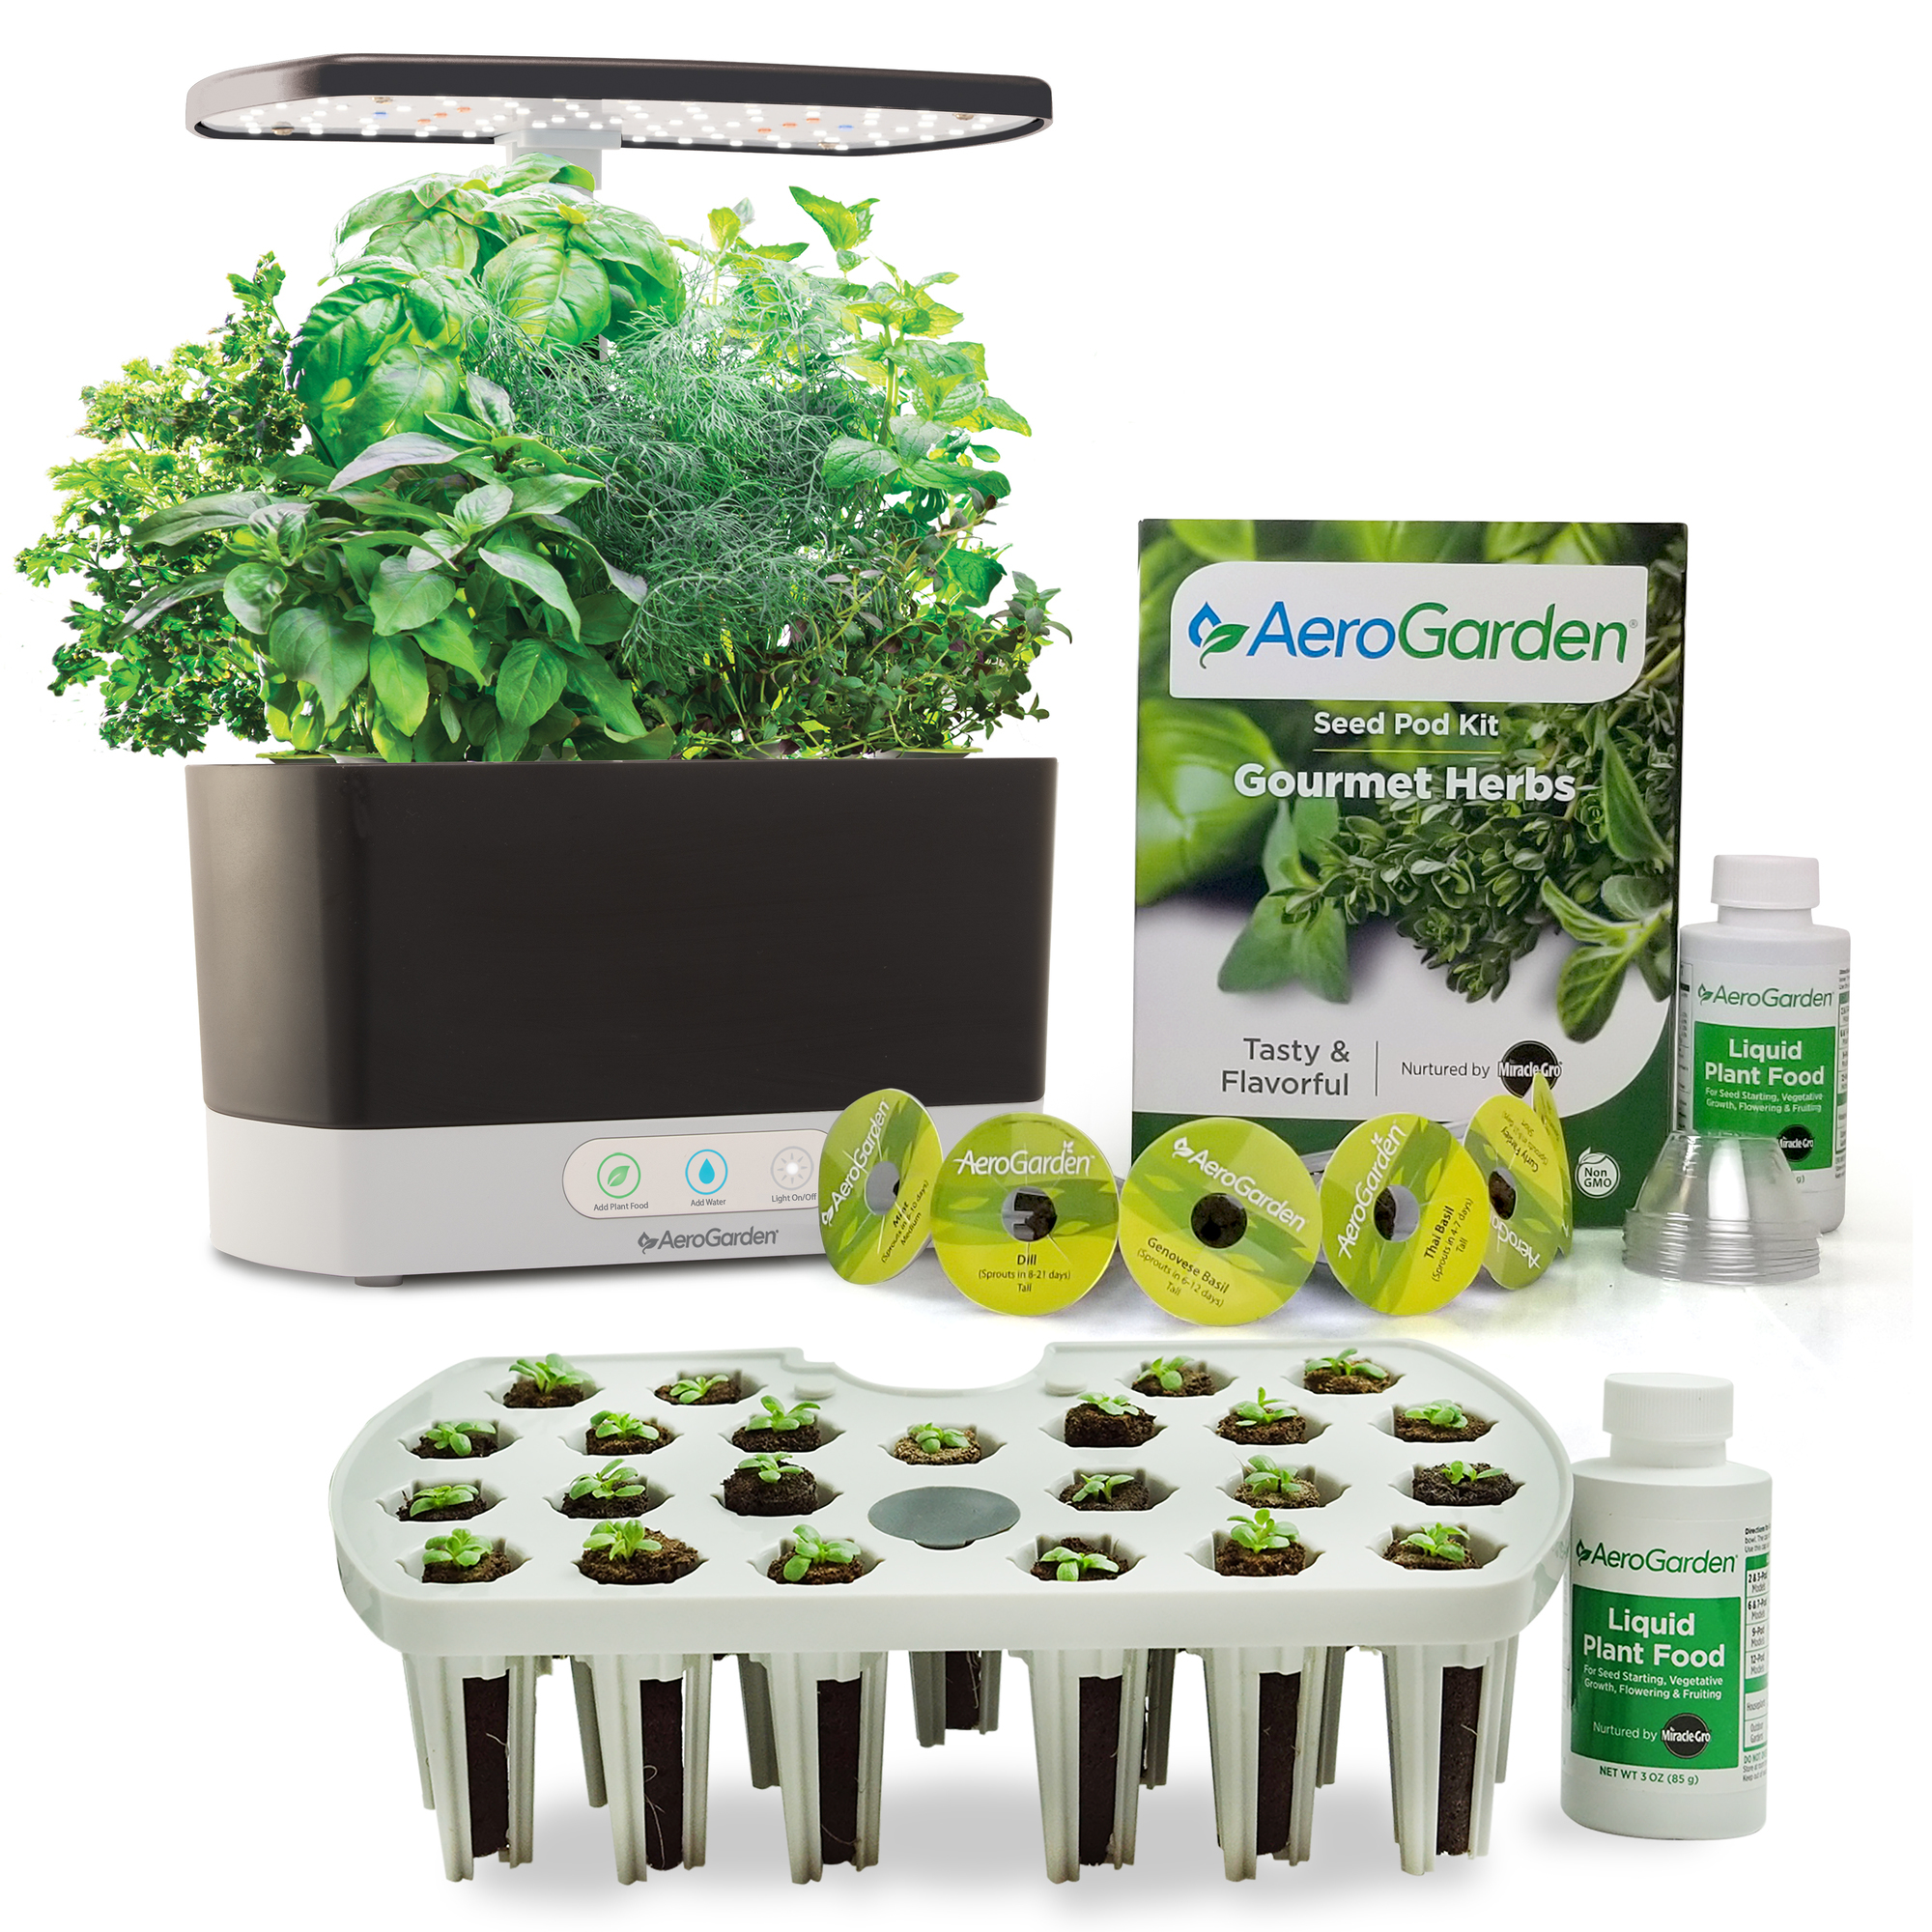 AeroGarden Harvest with bonus 23 pod Seed Starting System and 6 Gourmet Herb pods - $76 off MRSP of $175 - $99